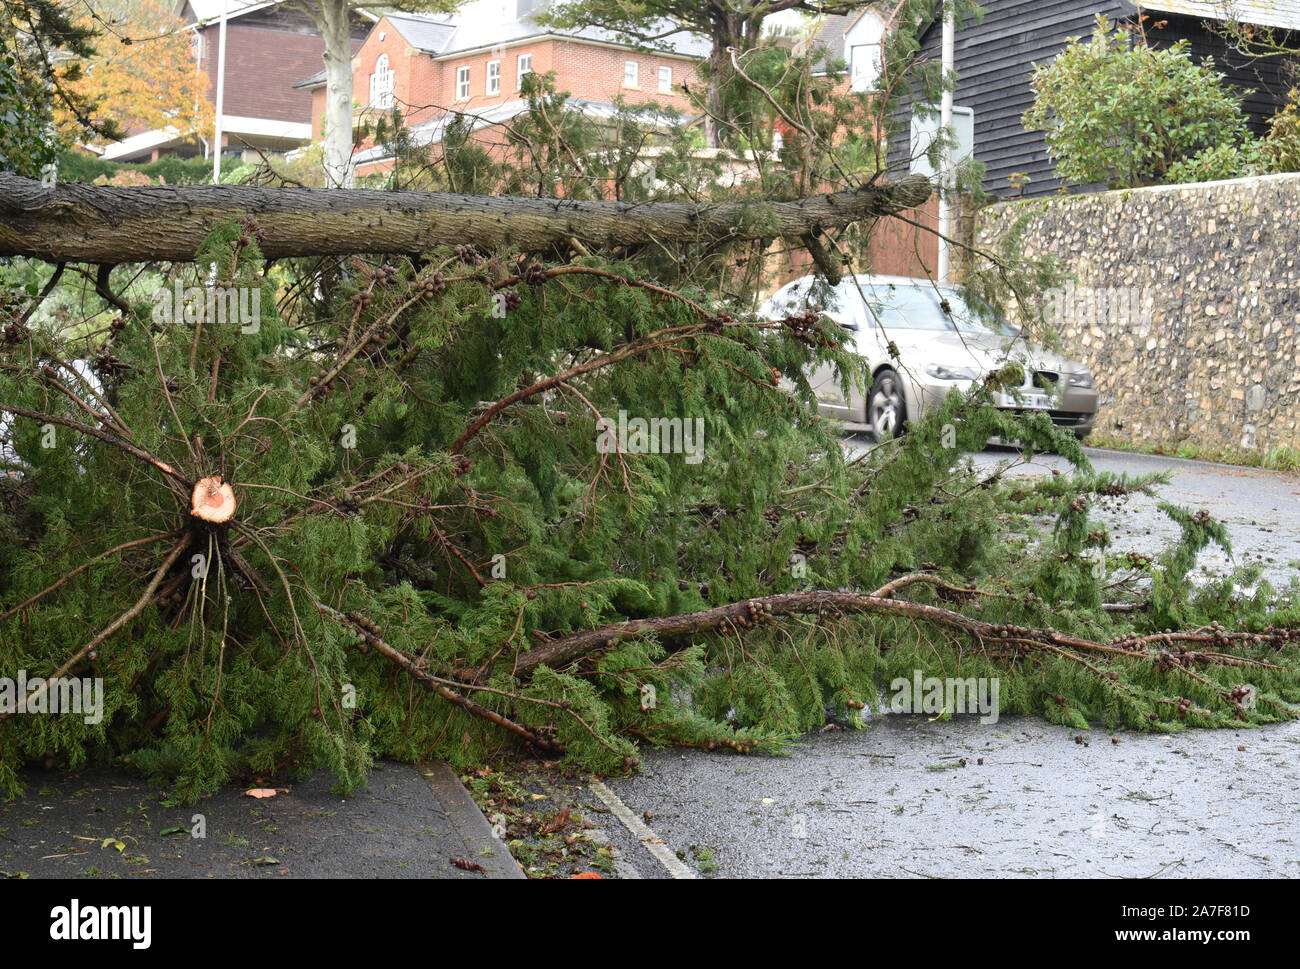 Lyme Regis, Dorset, UK.  2nd November 2019. UK Weather: Stormy weather and gale force winds bring trees crashing down in West Dorset.  A main route into the coastal resort of Lyme Regis is blocked by a large fallen tree. Vehicles are forced onto the other side of the road to avoid the tree and broken branches. Weather warnings remain in place across the South West as the storm conditions are set to continue.   Credit: Celia McMahon/Alamy Live News. Stock Photo